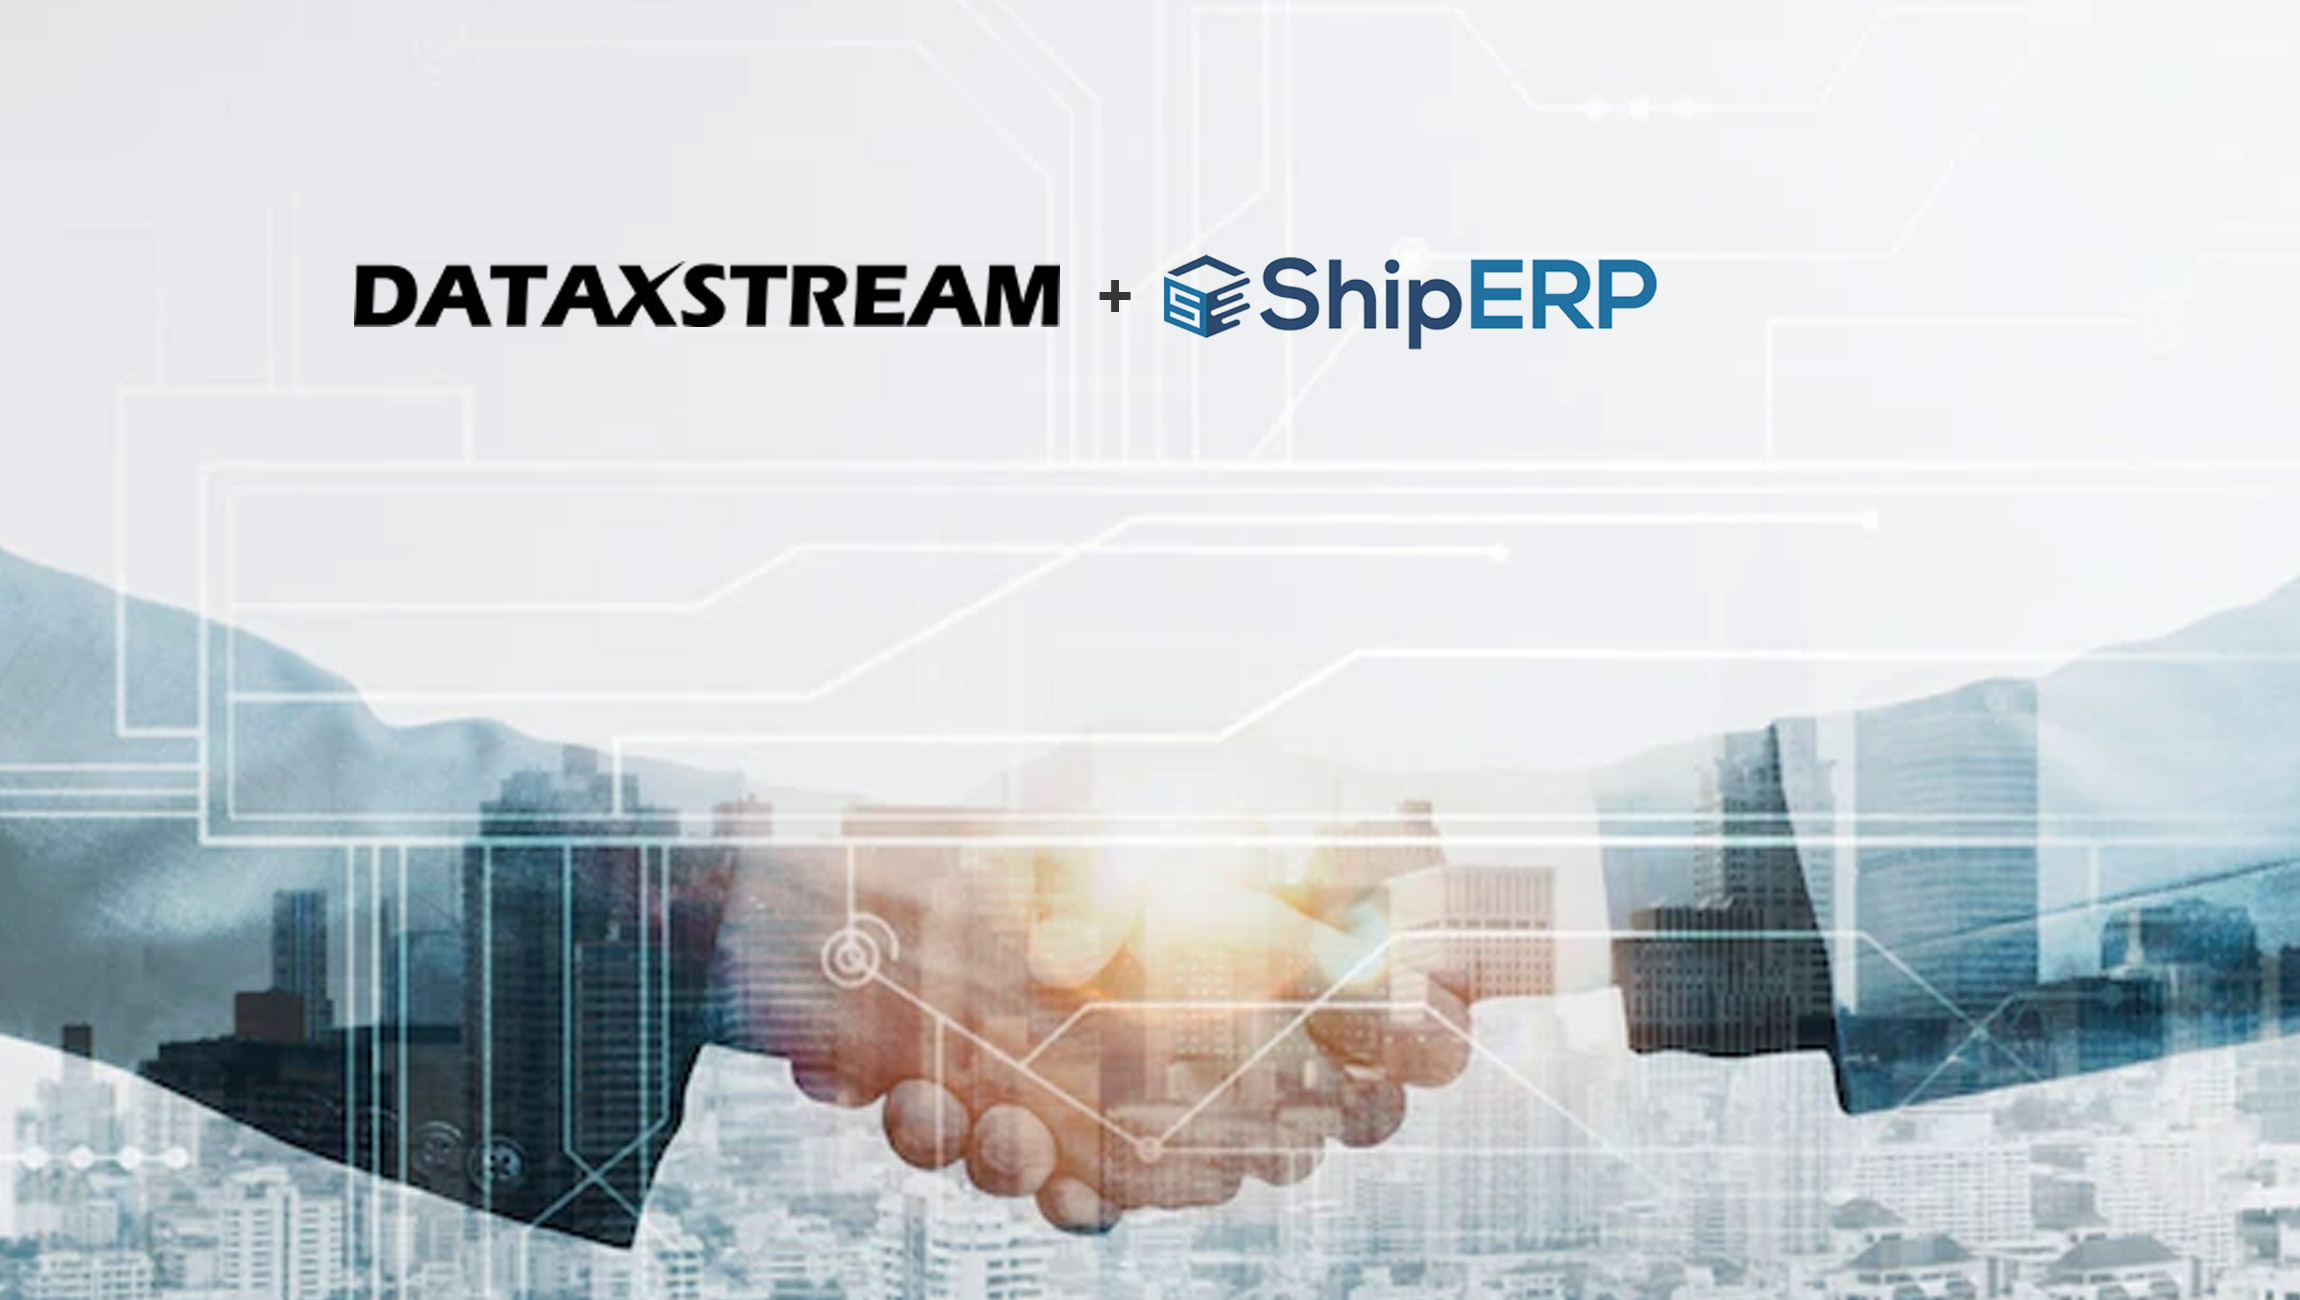 DataXstream and ShipERP Announce New Partnership to Create Synergies in Order Management and Shipping Expertise